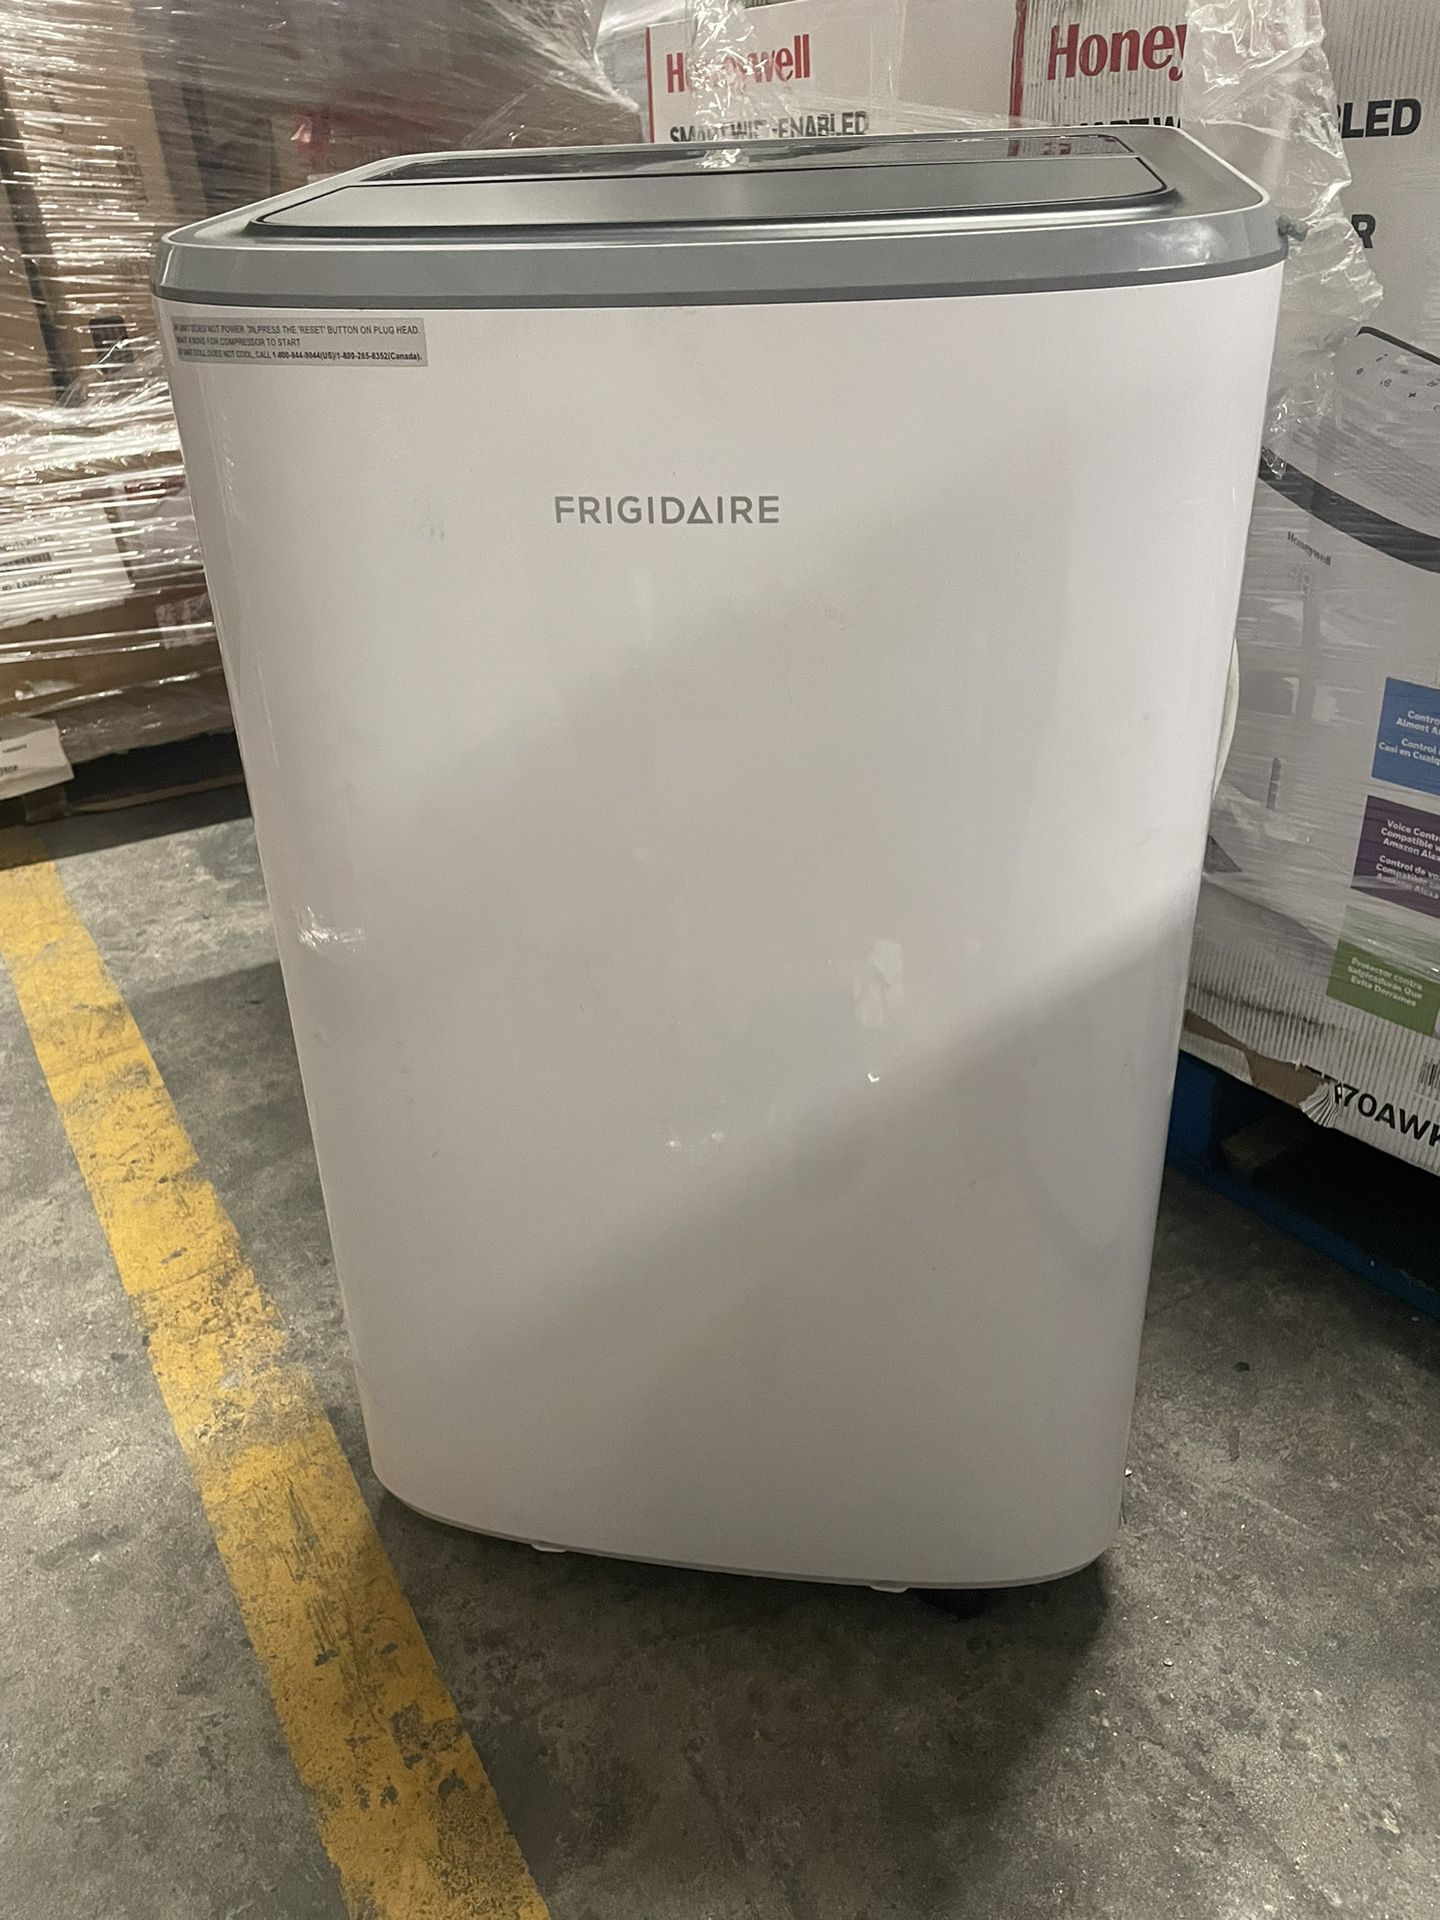 Frigidaire FHPC102AC1 Portable Room Air Conditioner, 6500 BTU with Multi-Speed Fan, Dehumidifier Mode, Built-in Air Ionizer, Easy-to-Clean Washable Fi